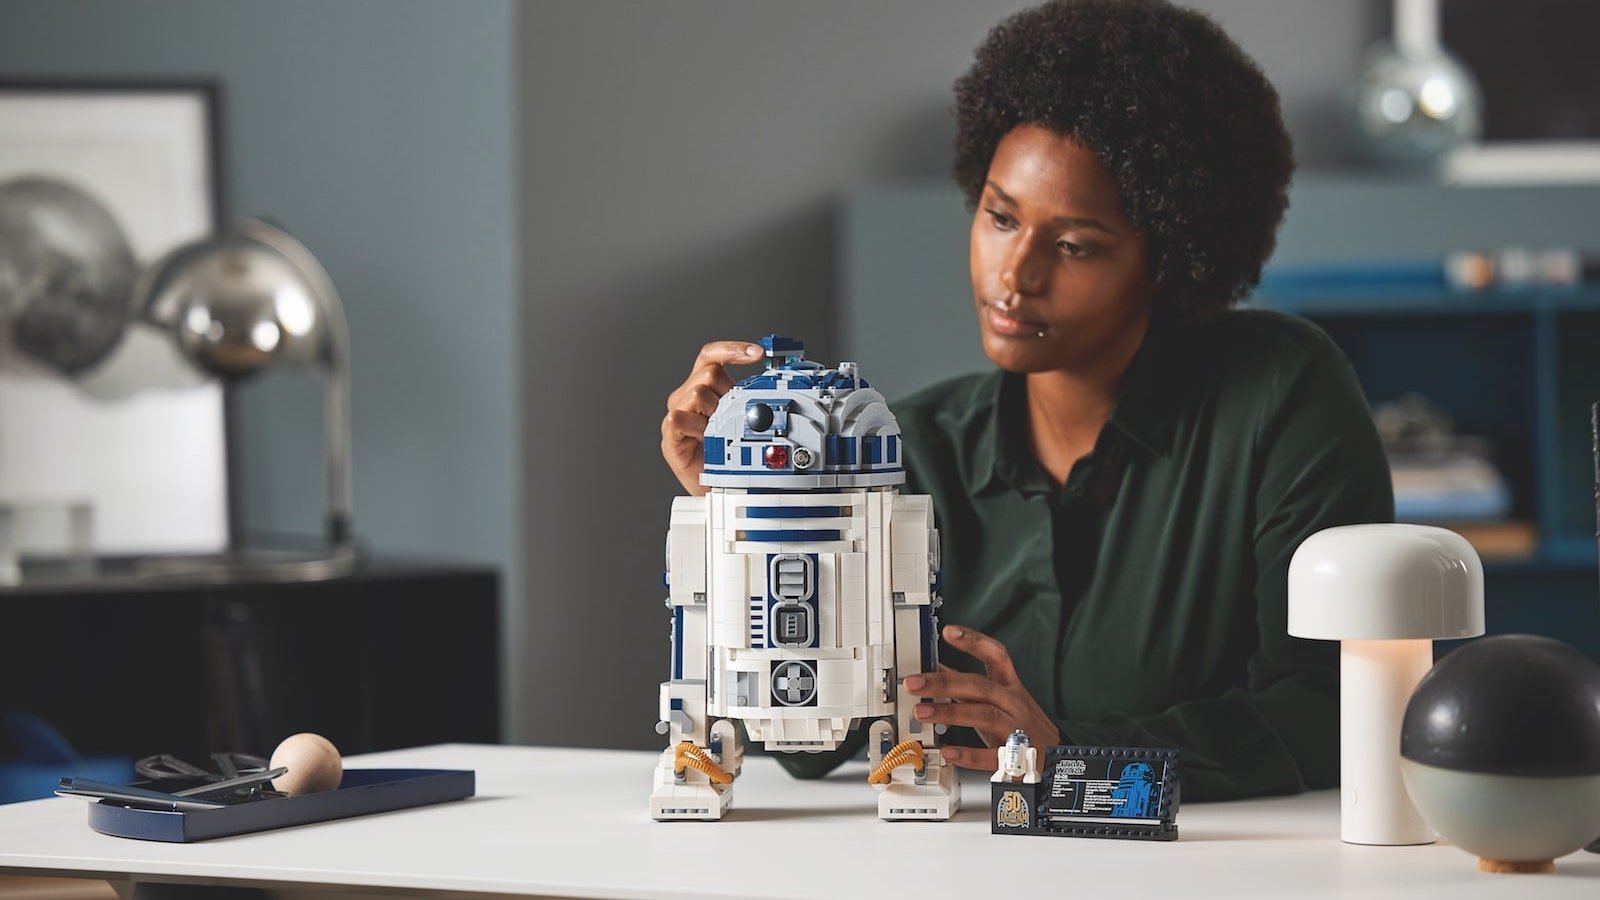 LEGO Star Wars R2-D2 construction set boasts authentic features, such as a rotating head